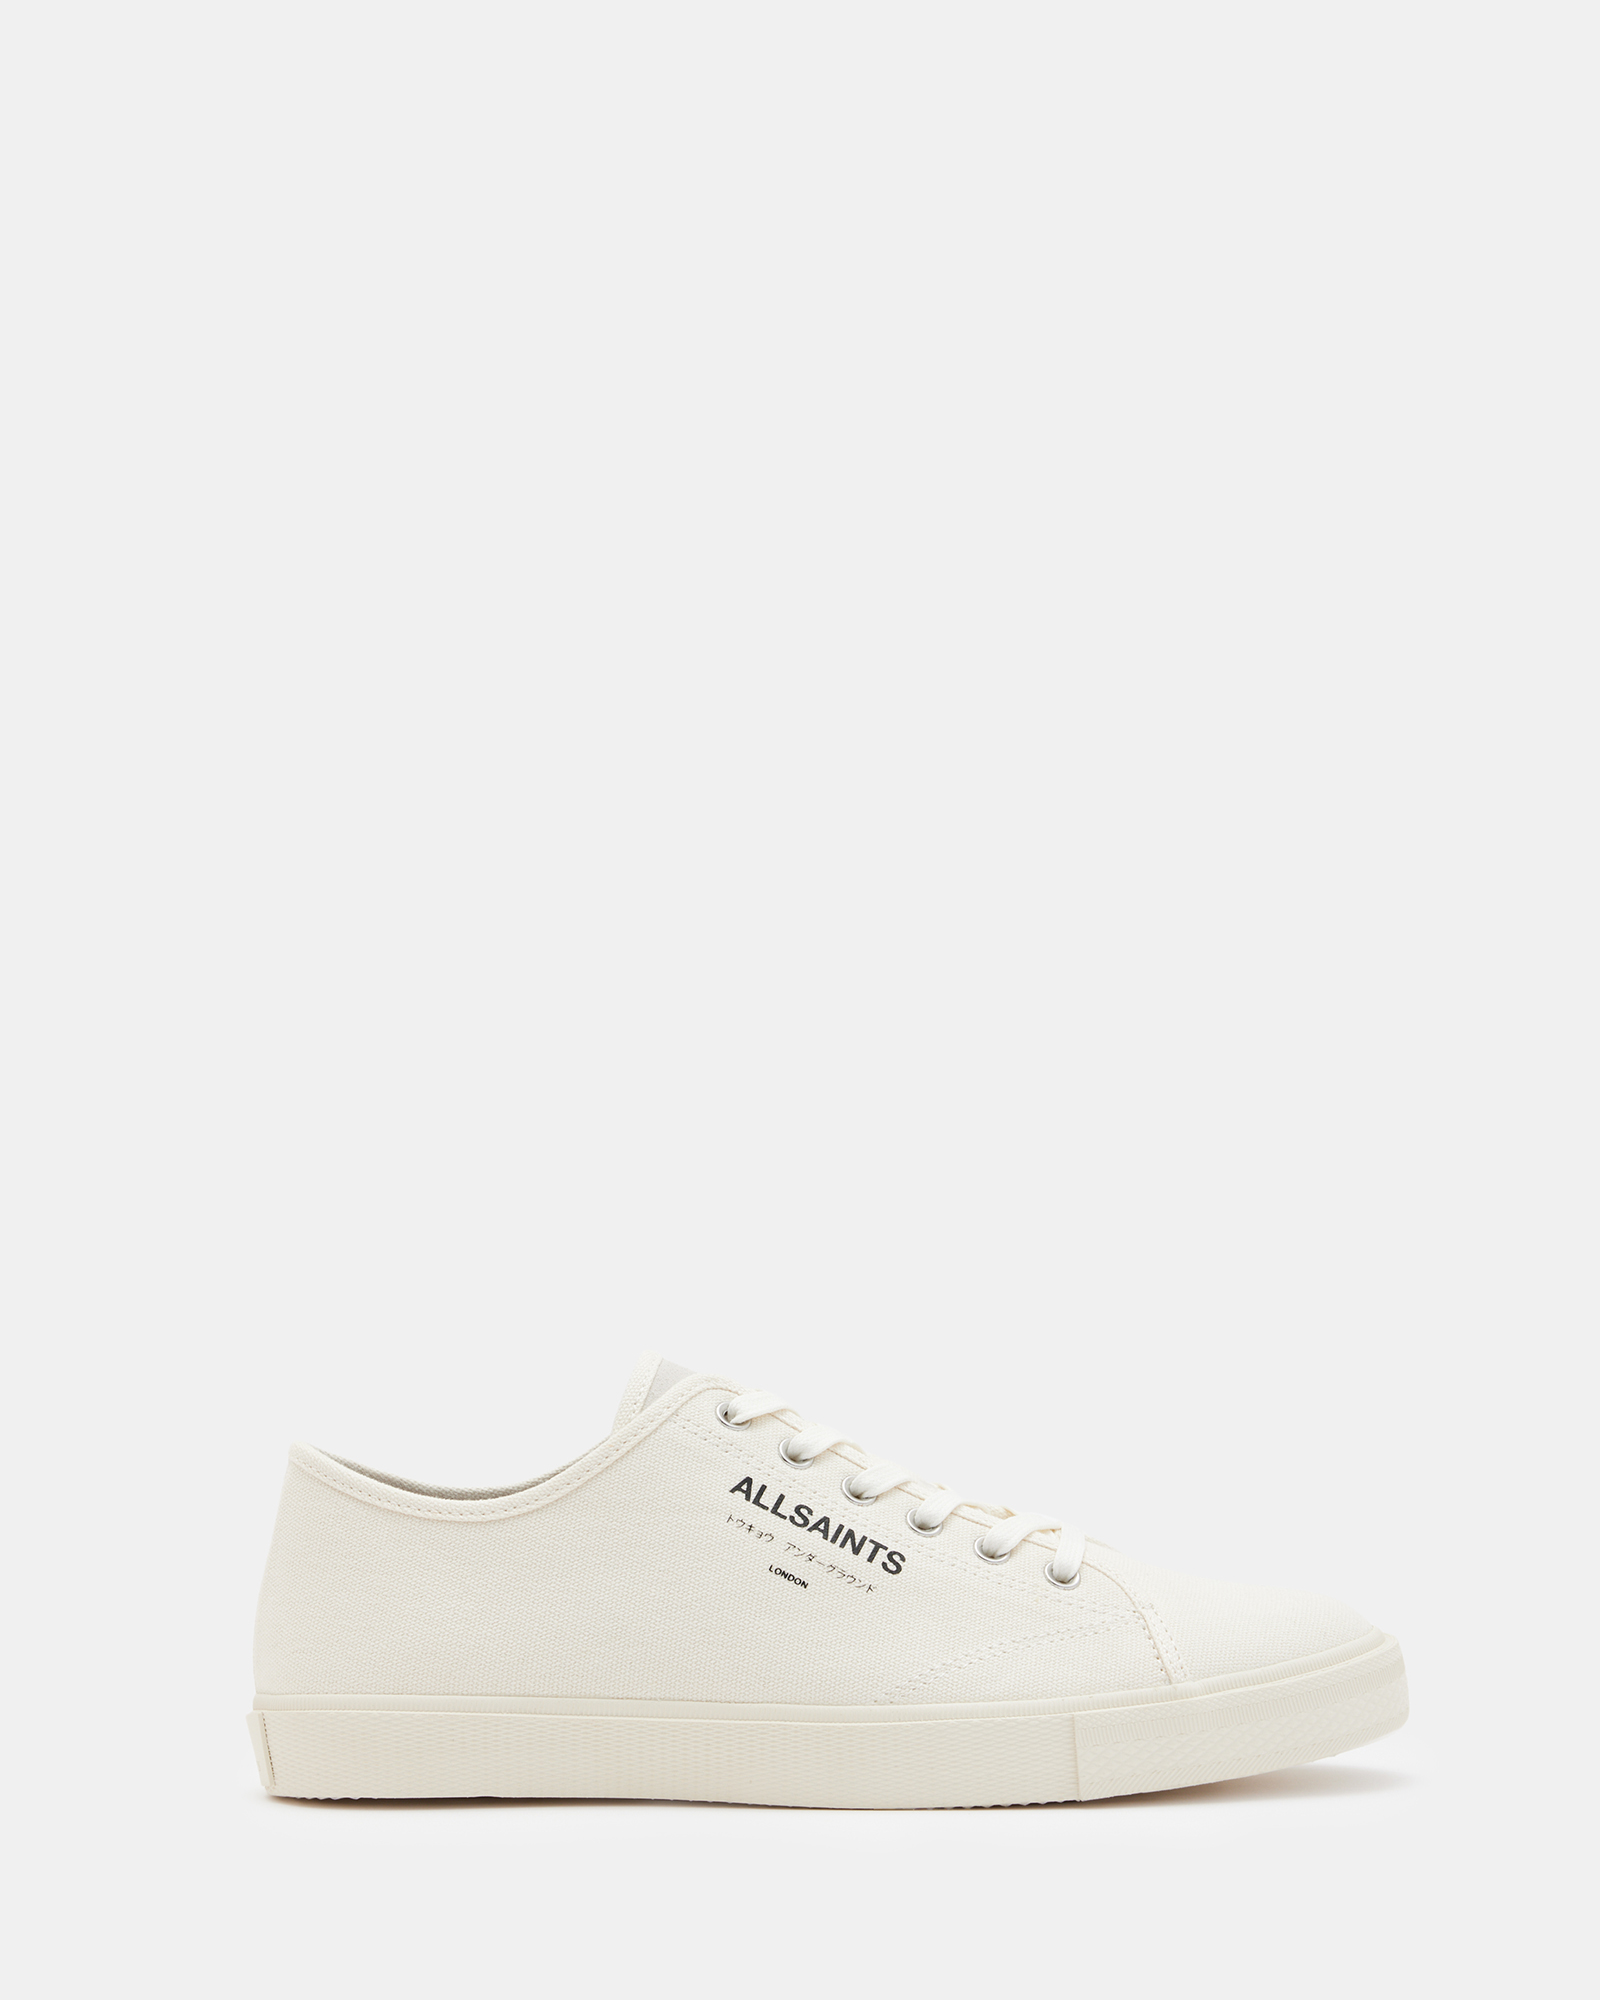 AllSaints Underground Canvas Low Top Trainers,, Off White